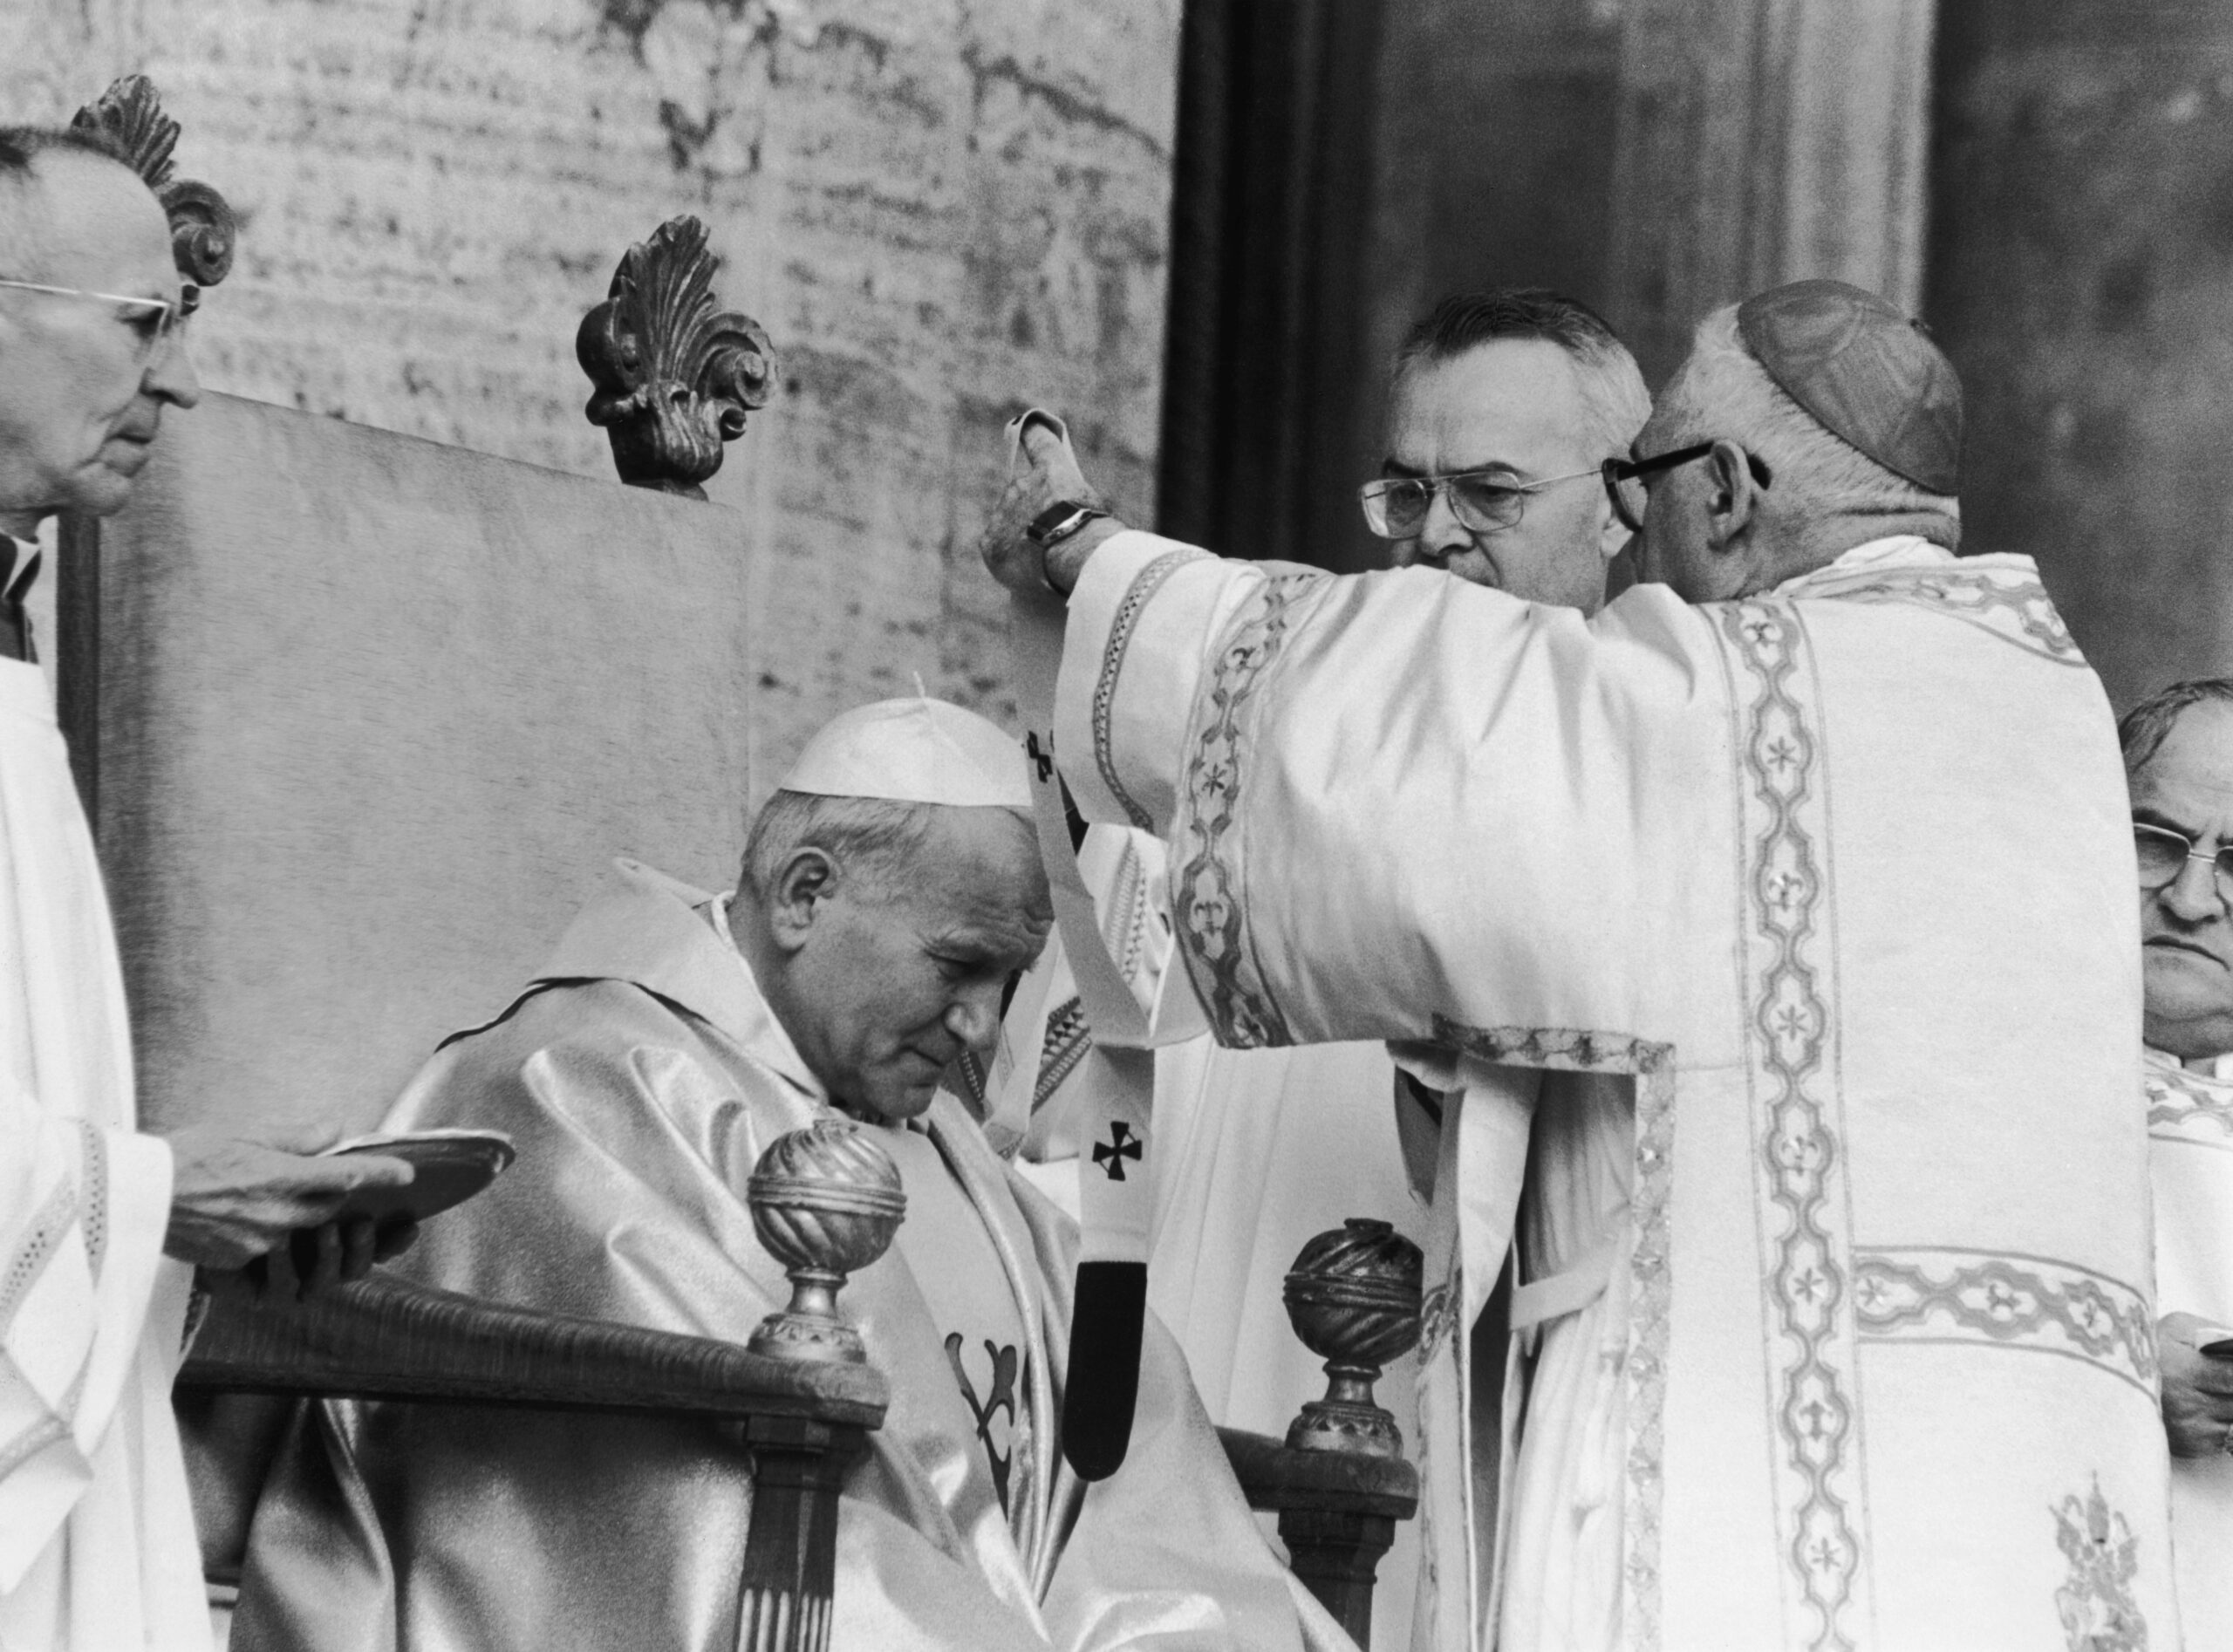 Pope John Paul II (Karol Wojtyla) at his enthronement ceremony in St. Peter’s Square, Rome, October 22, 1978 (Keystone/Getty Images)